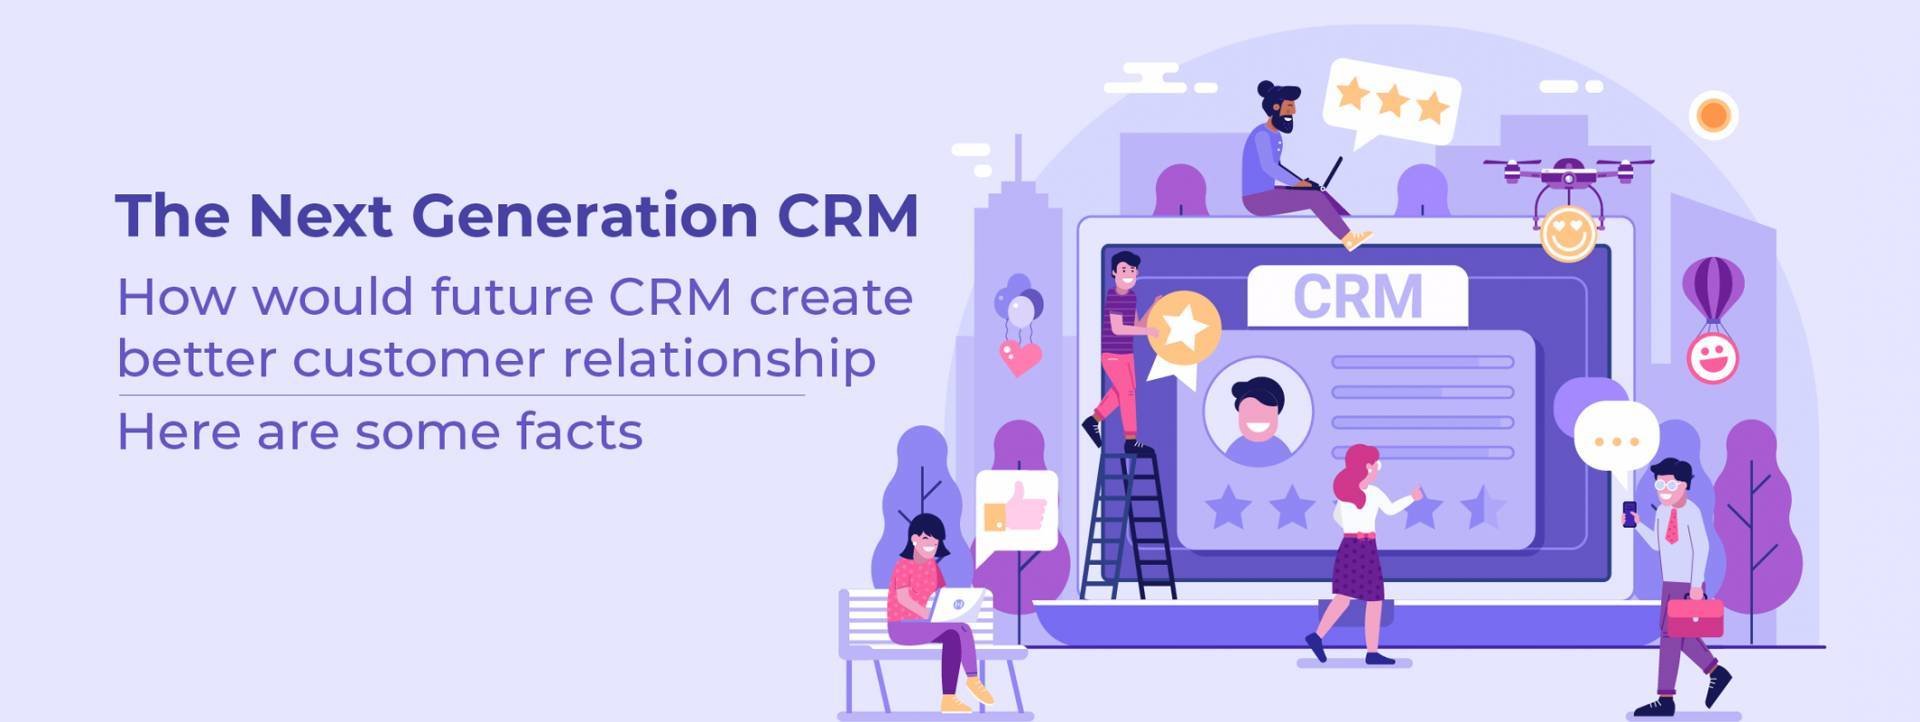 The Next Generation CRM